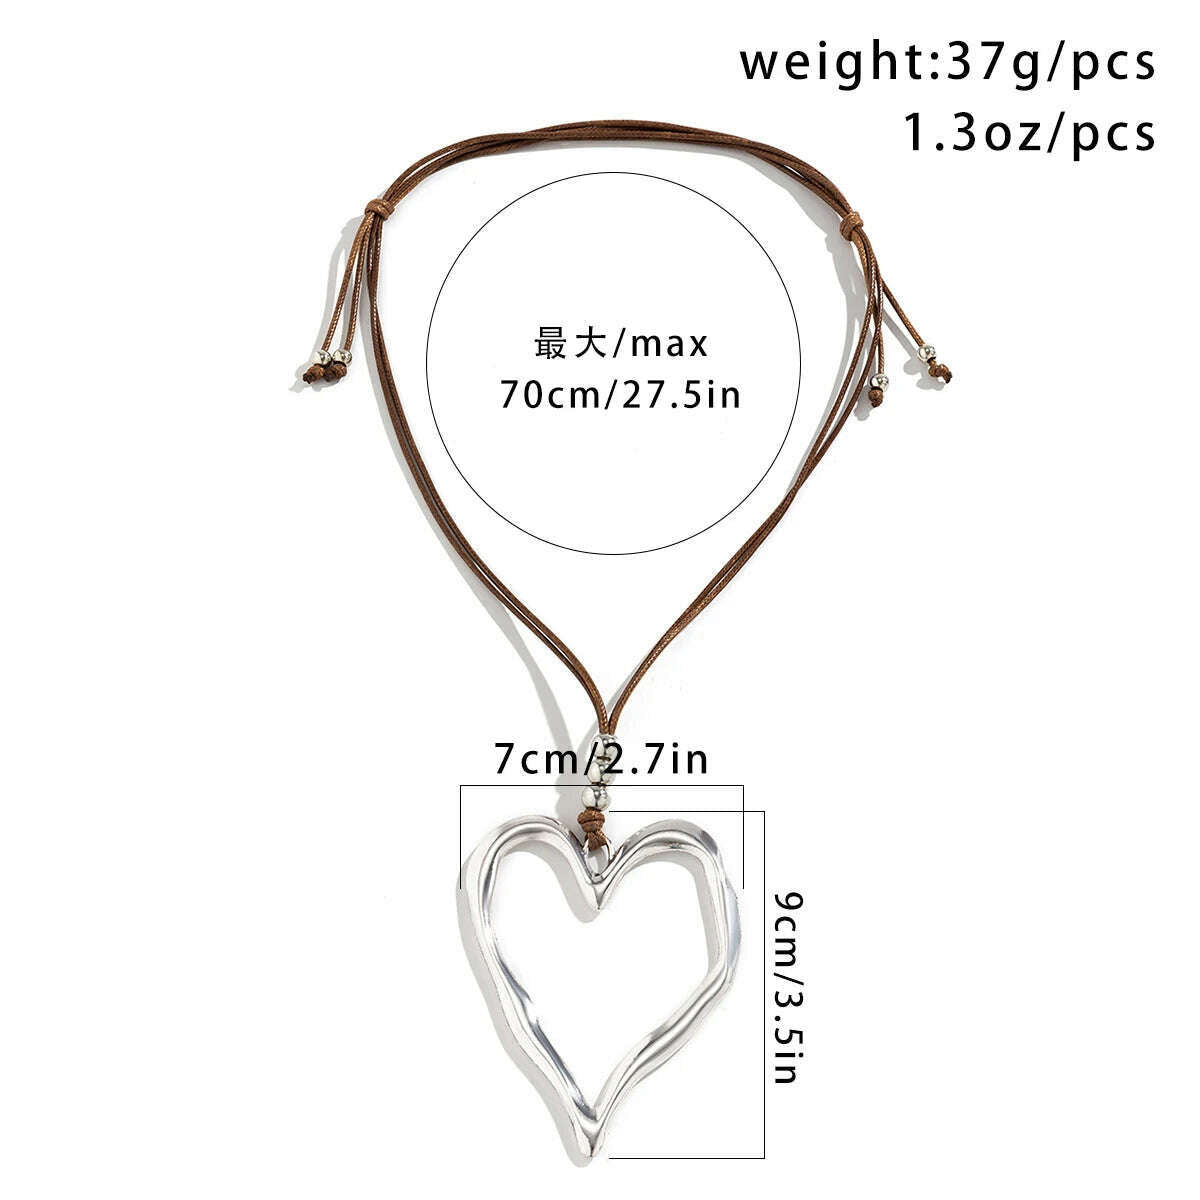 KIMLUD, Exaggerated Big Hollow Heart Pendant Necklace for Women Trendy Bohemia Adjustable Rope Chain on Neck Accessories Fashion Jewelry, KIMLUD Womens Clothes